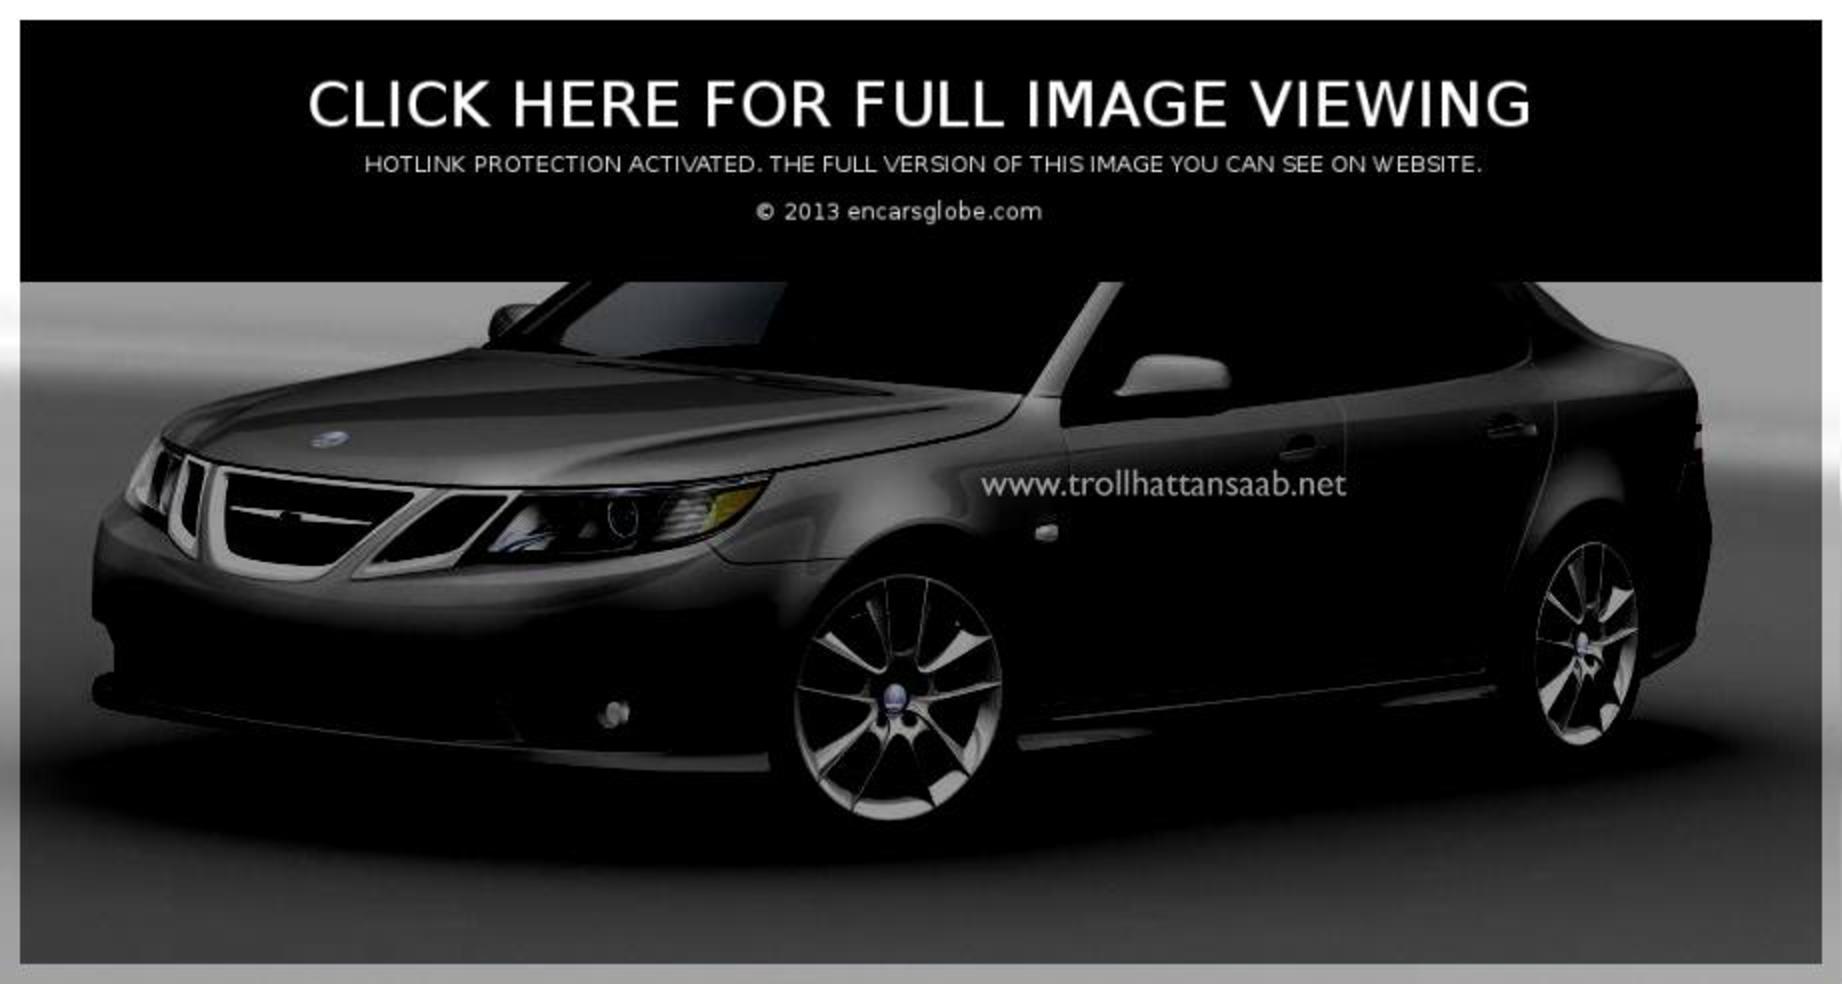 Saab 93 20 TDi Photo Gallery: Photo #04 out of 12, Image Size ...